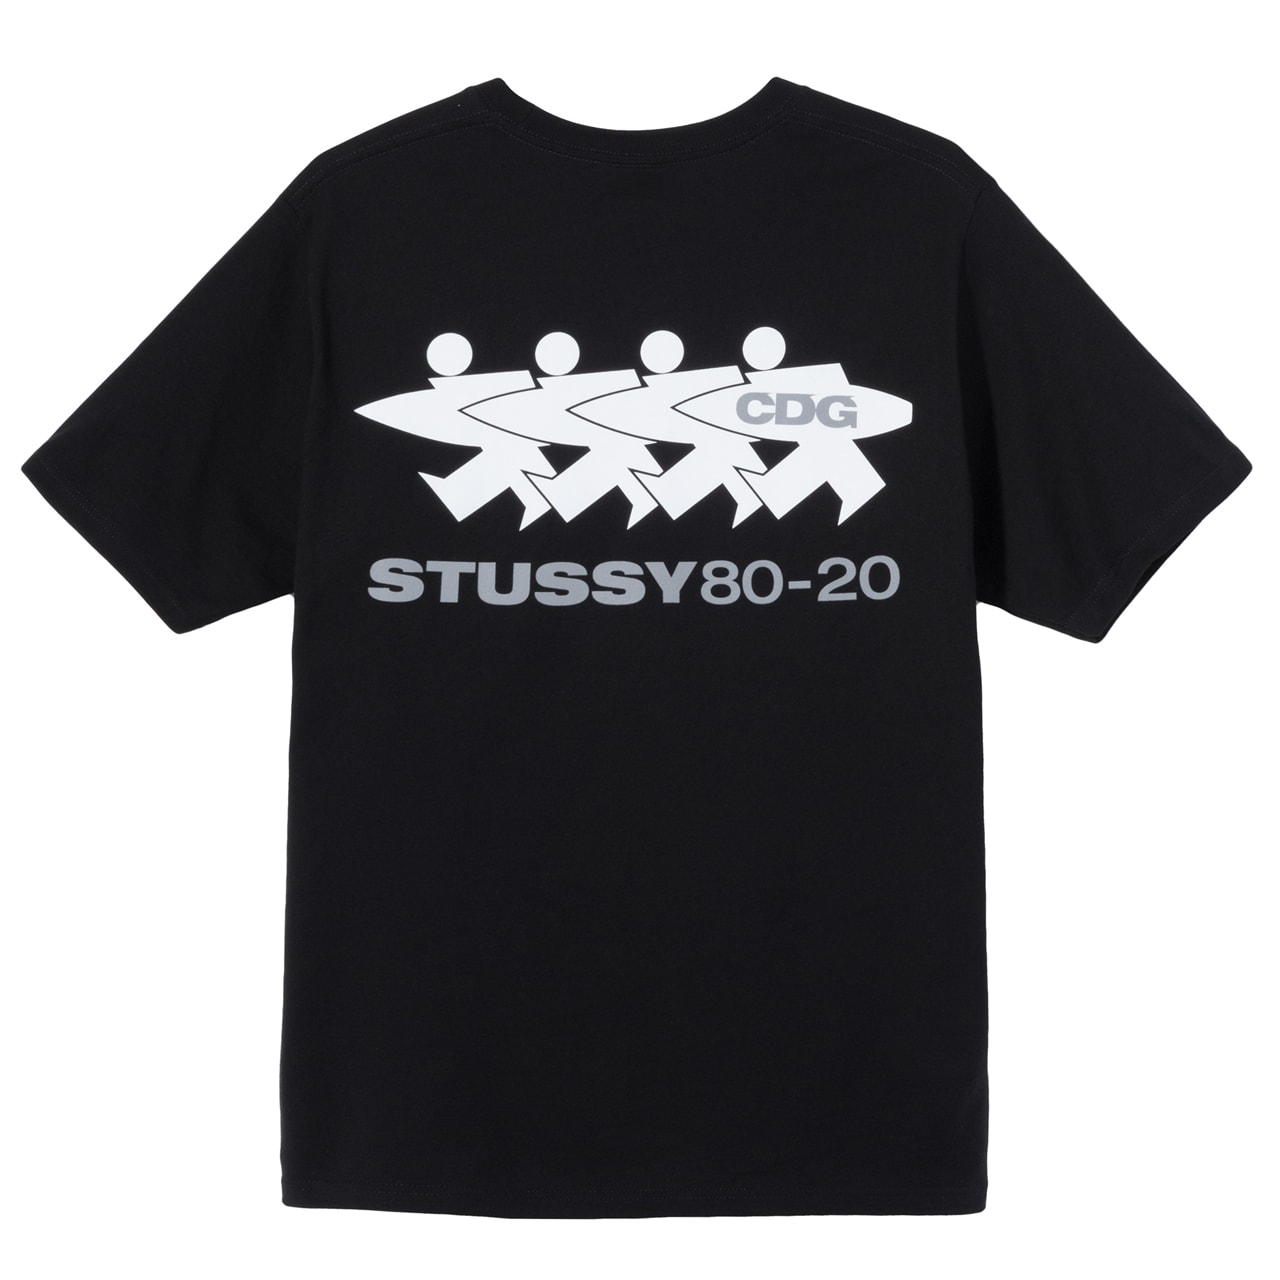 CDG COMME des GARÇONS x Stüssy 40th Anniversary collaboration collection release date info buy november 13 2020 dover street market